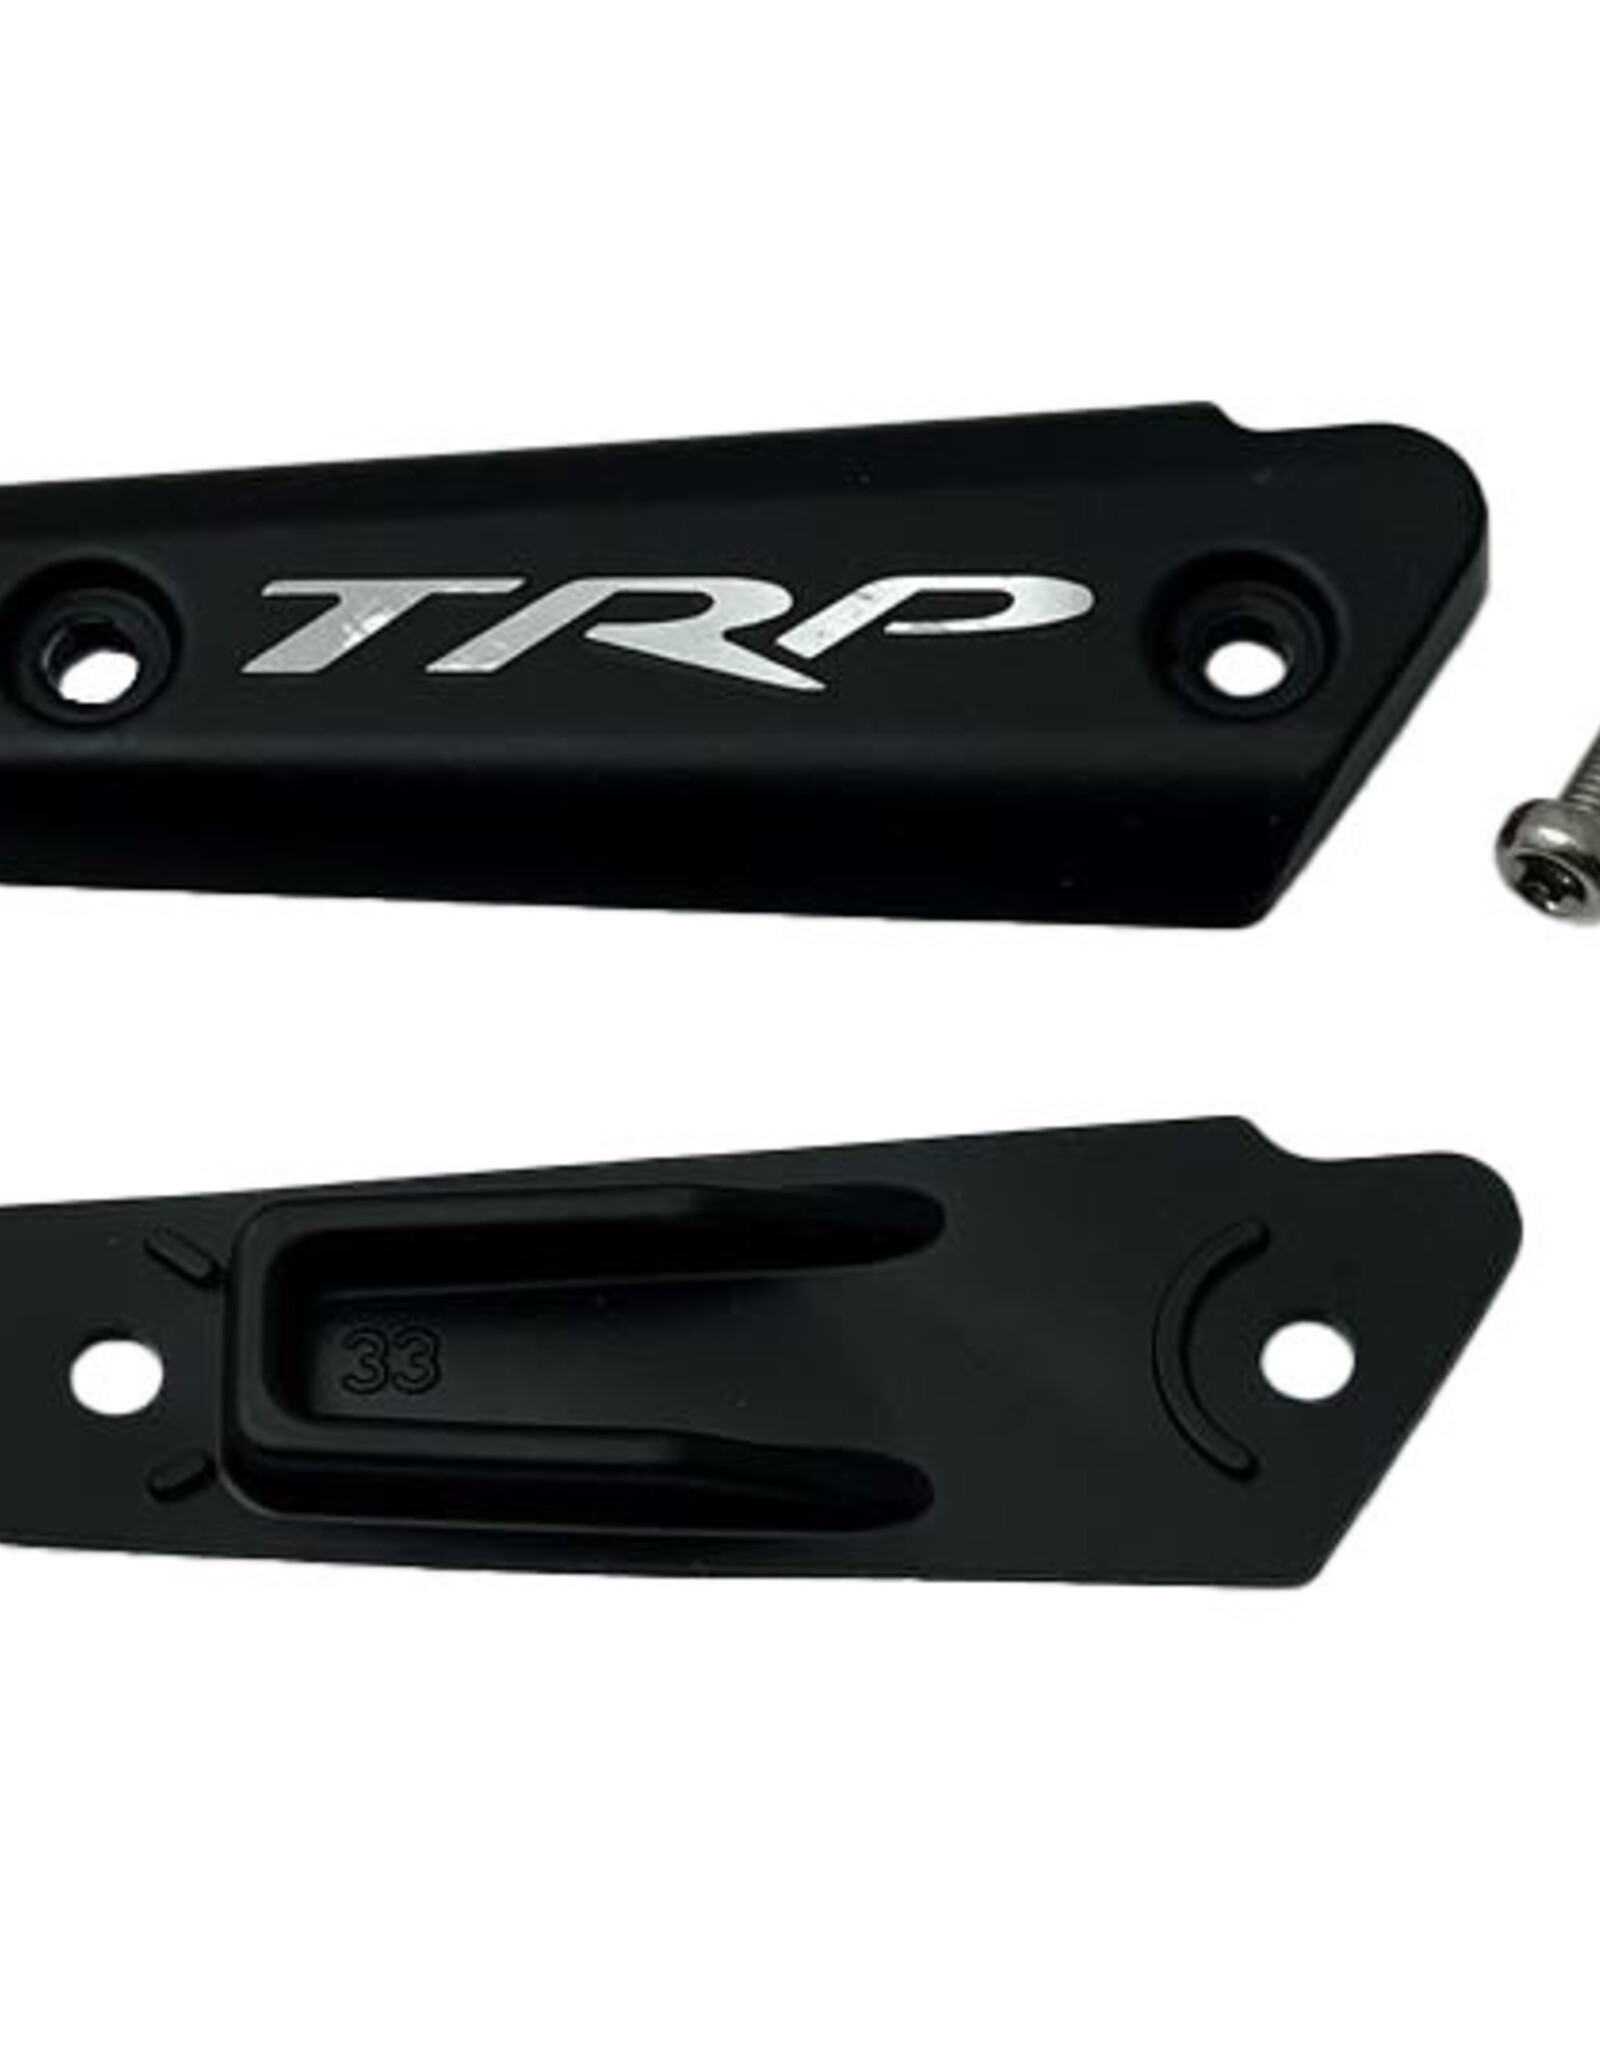 TRP DH-R EVO RIGHT HAND Reservoir Top Cap Kit. Includes Top Cap, Gasket, Screws, and Bleed Plug